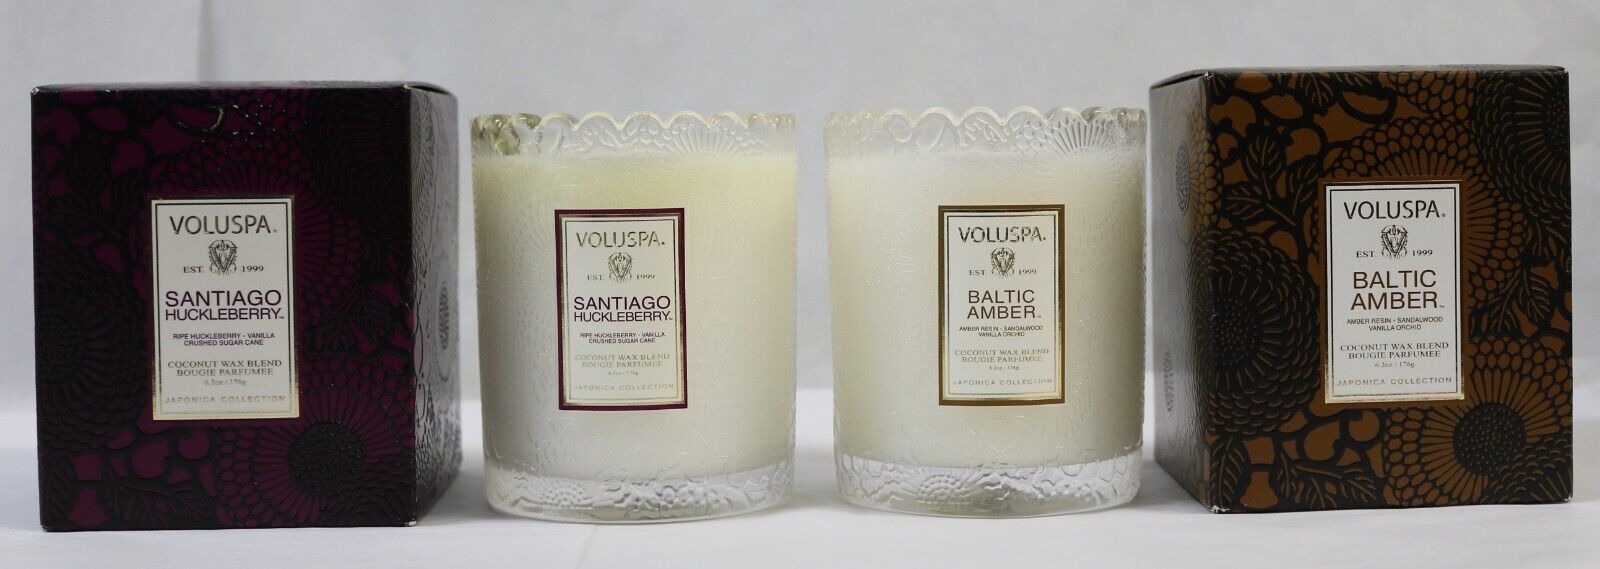 Primary image for 2 Pc VOLUSPA Japonica Candle Set Lot - Santiago Huckleberry & Baltic Amber NIB